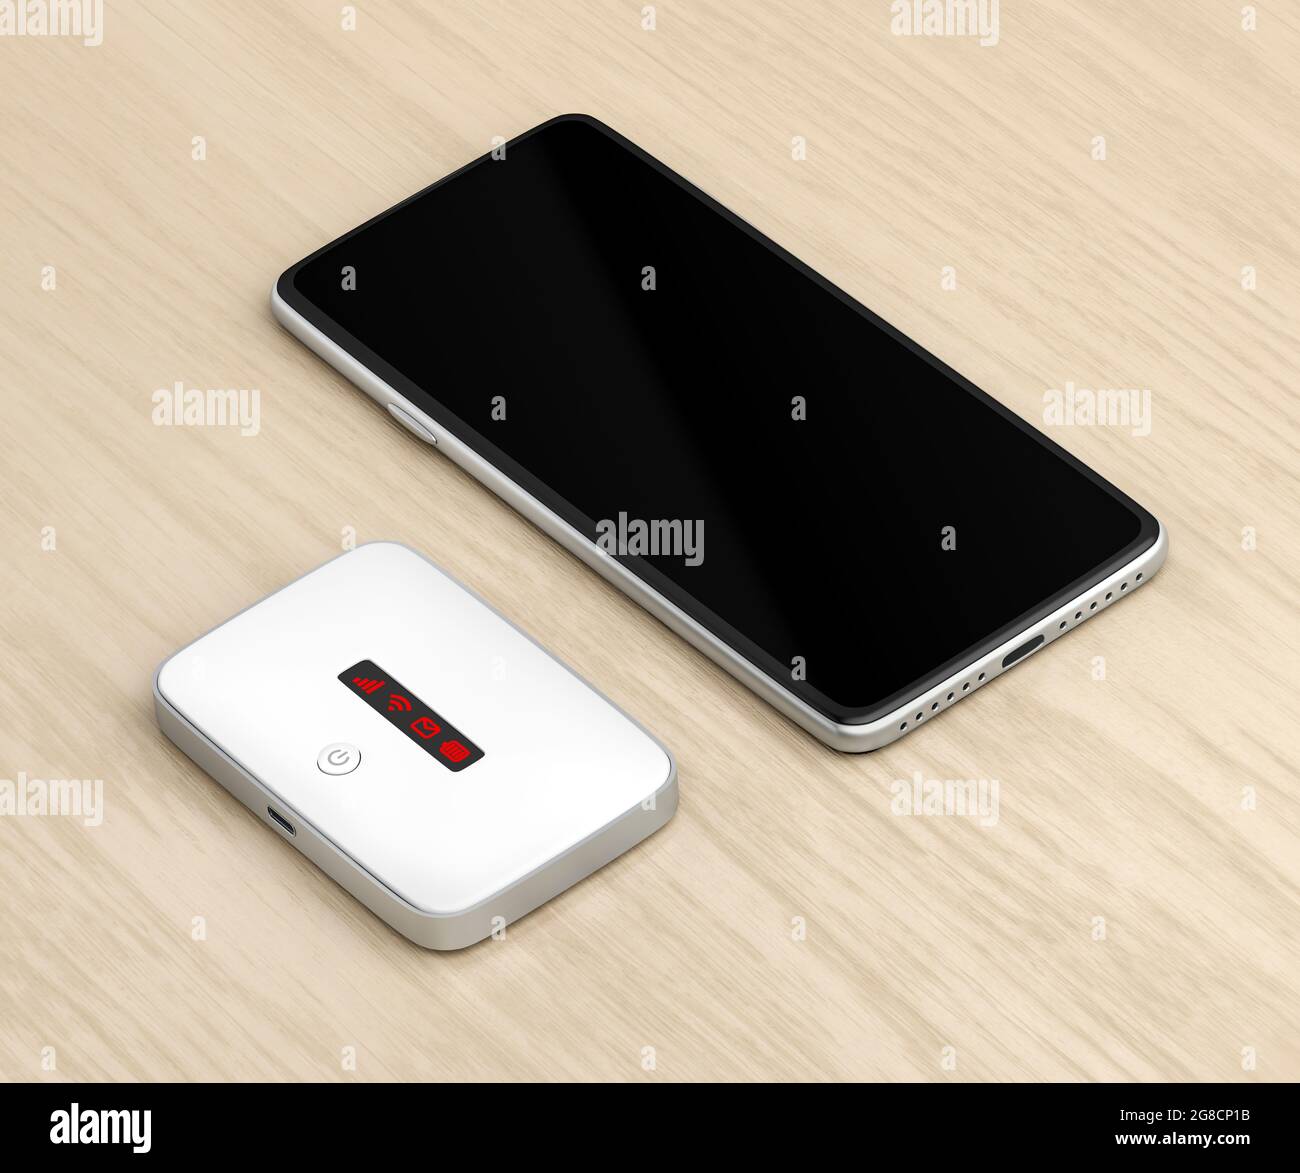 5G mobile wifi router and smartphone on wooden table Stock Photo - Alamy